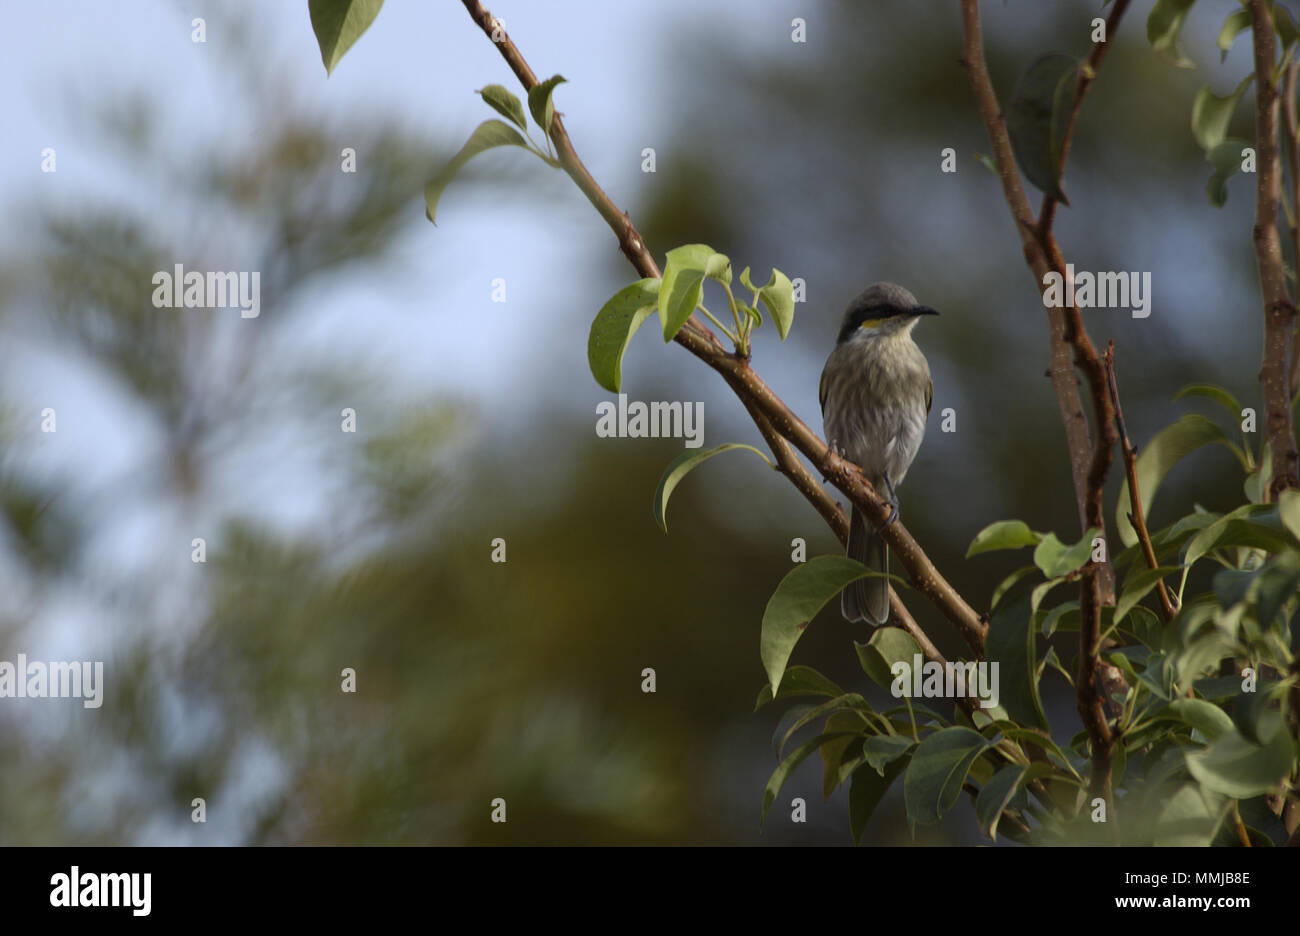 Singing honeyeater (Gavicalis virescens) is a small bird found in Australlia and is part of the honeyeater family (Meliphagidae). Stock Photo